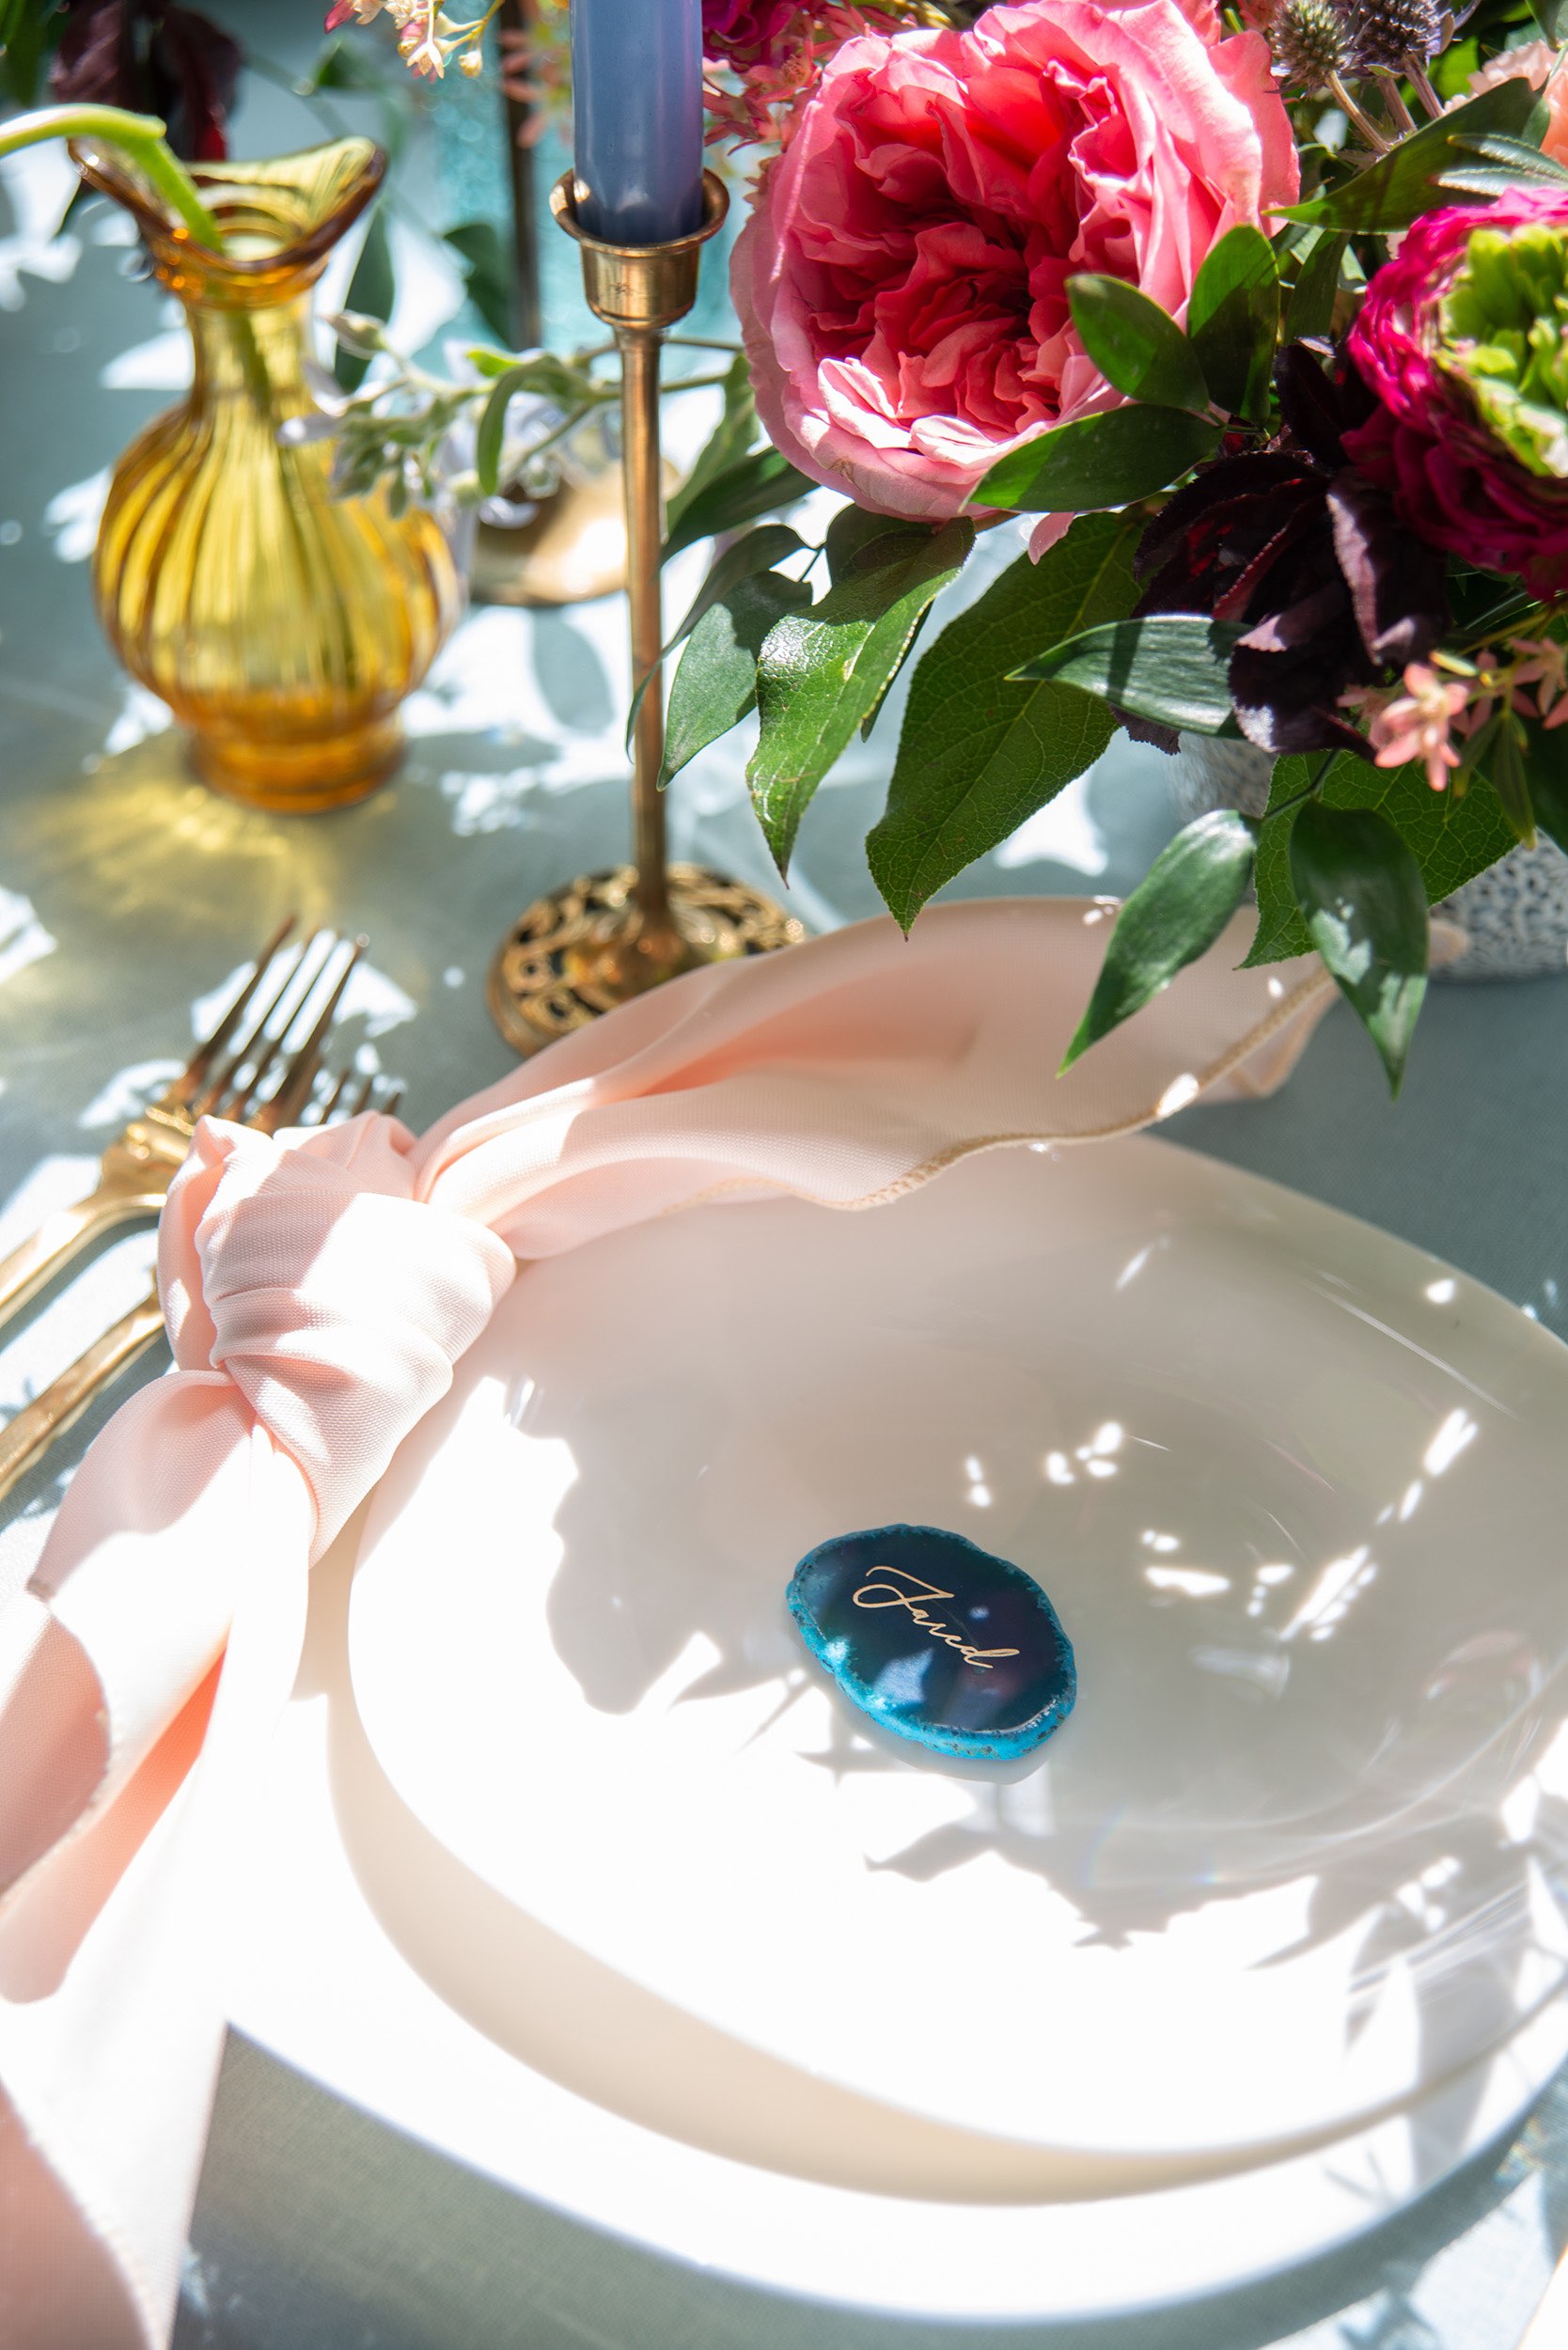 Table setting details with place setting and tableware.